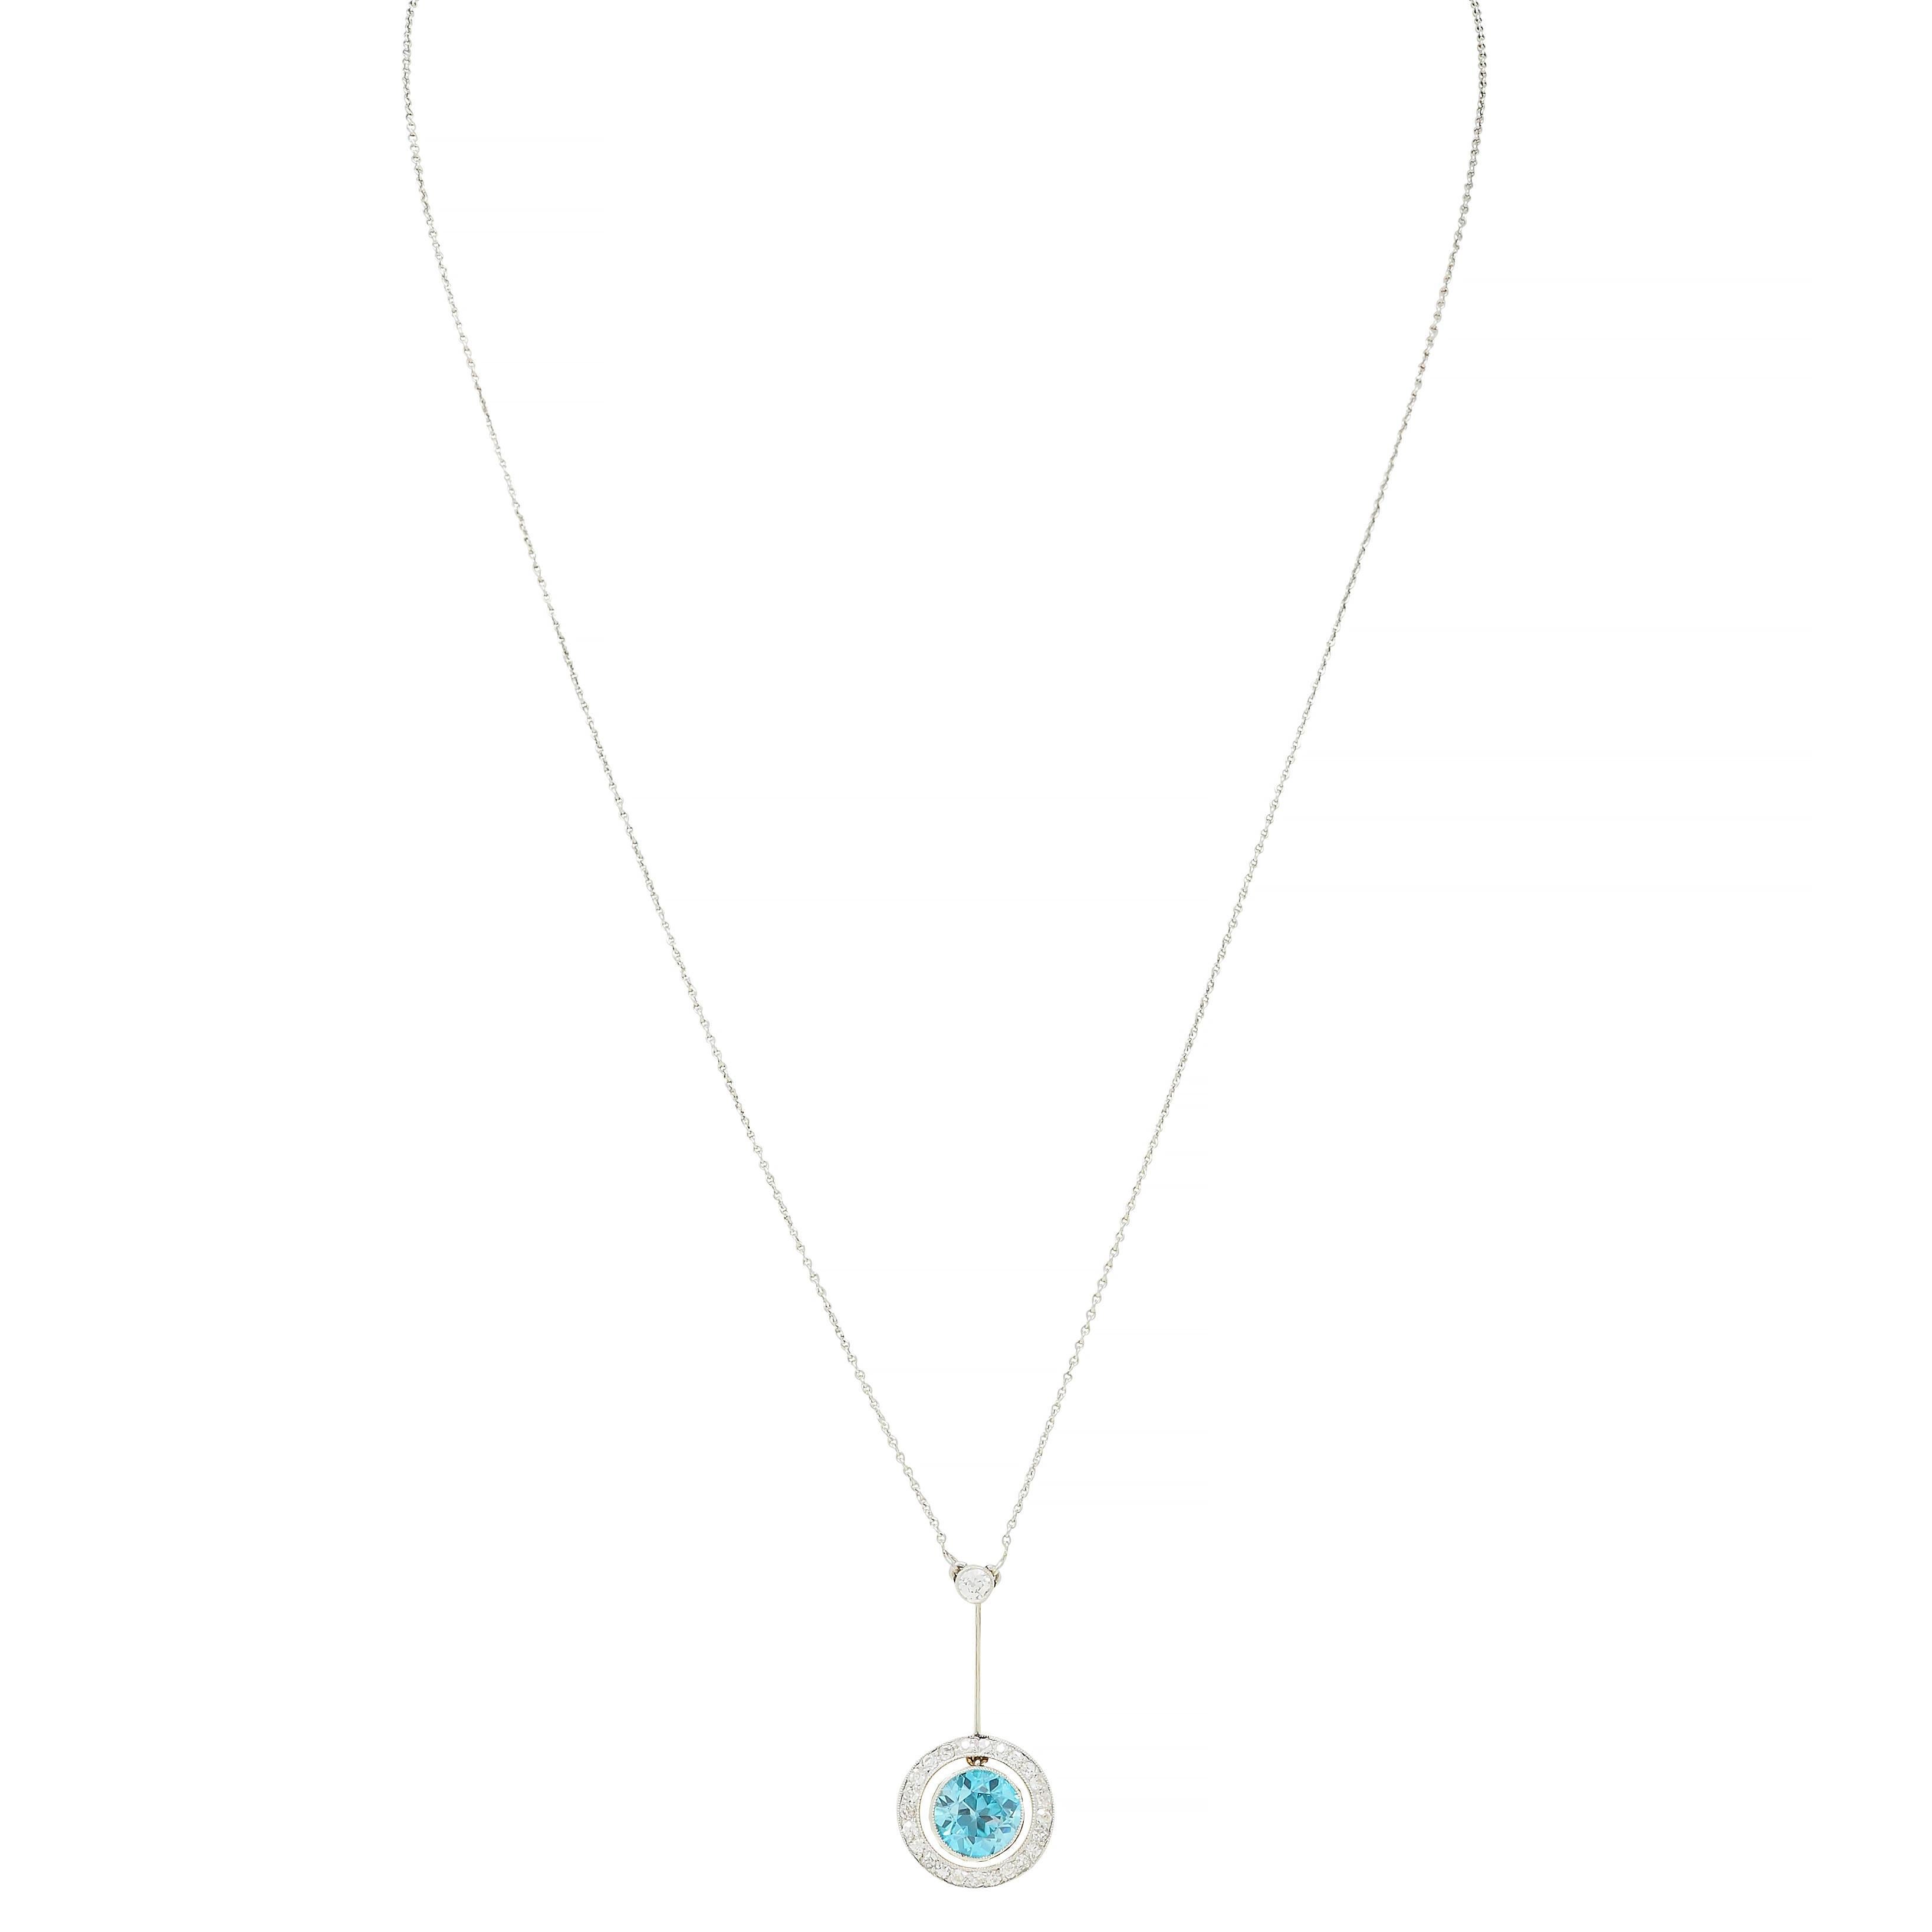 Comprised of a 0.5 mm platinum cable link chain suspending an articulating drop pendant
Featuring a round cut zircon weighing approximately 2.20. carats
Transparent, well-saturated medium vibrant blue - bezel set
Articulating in the center of a